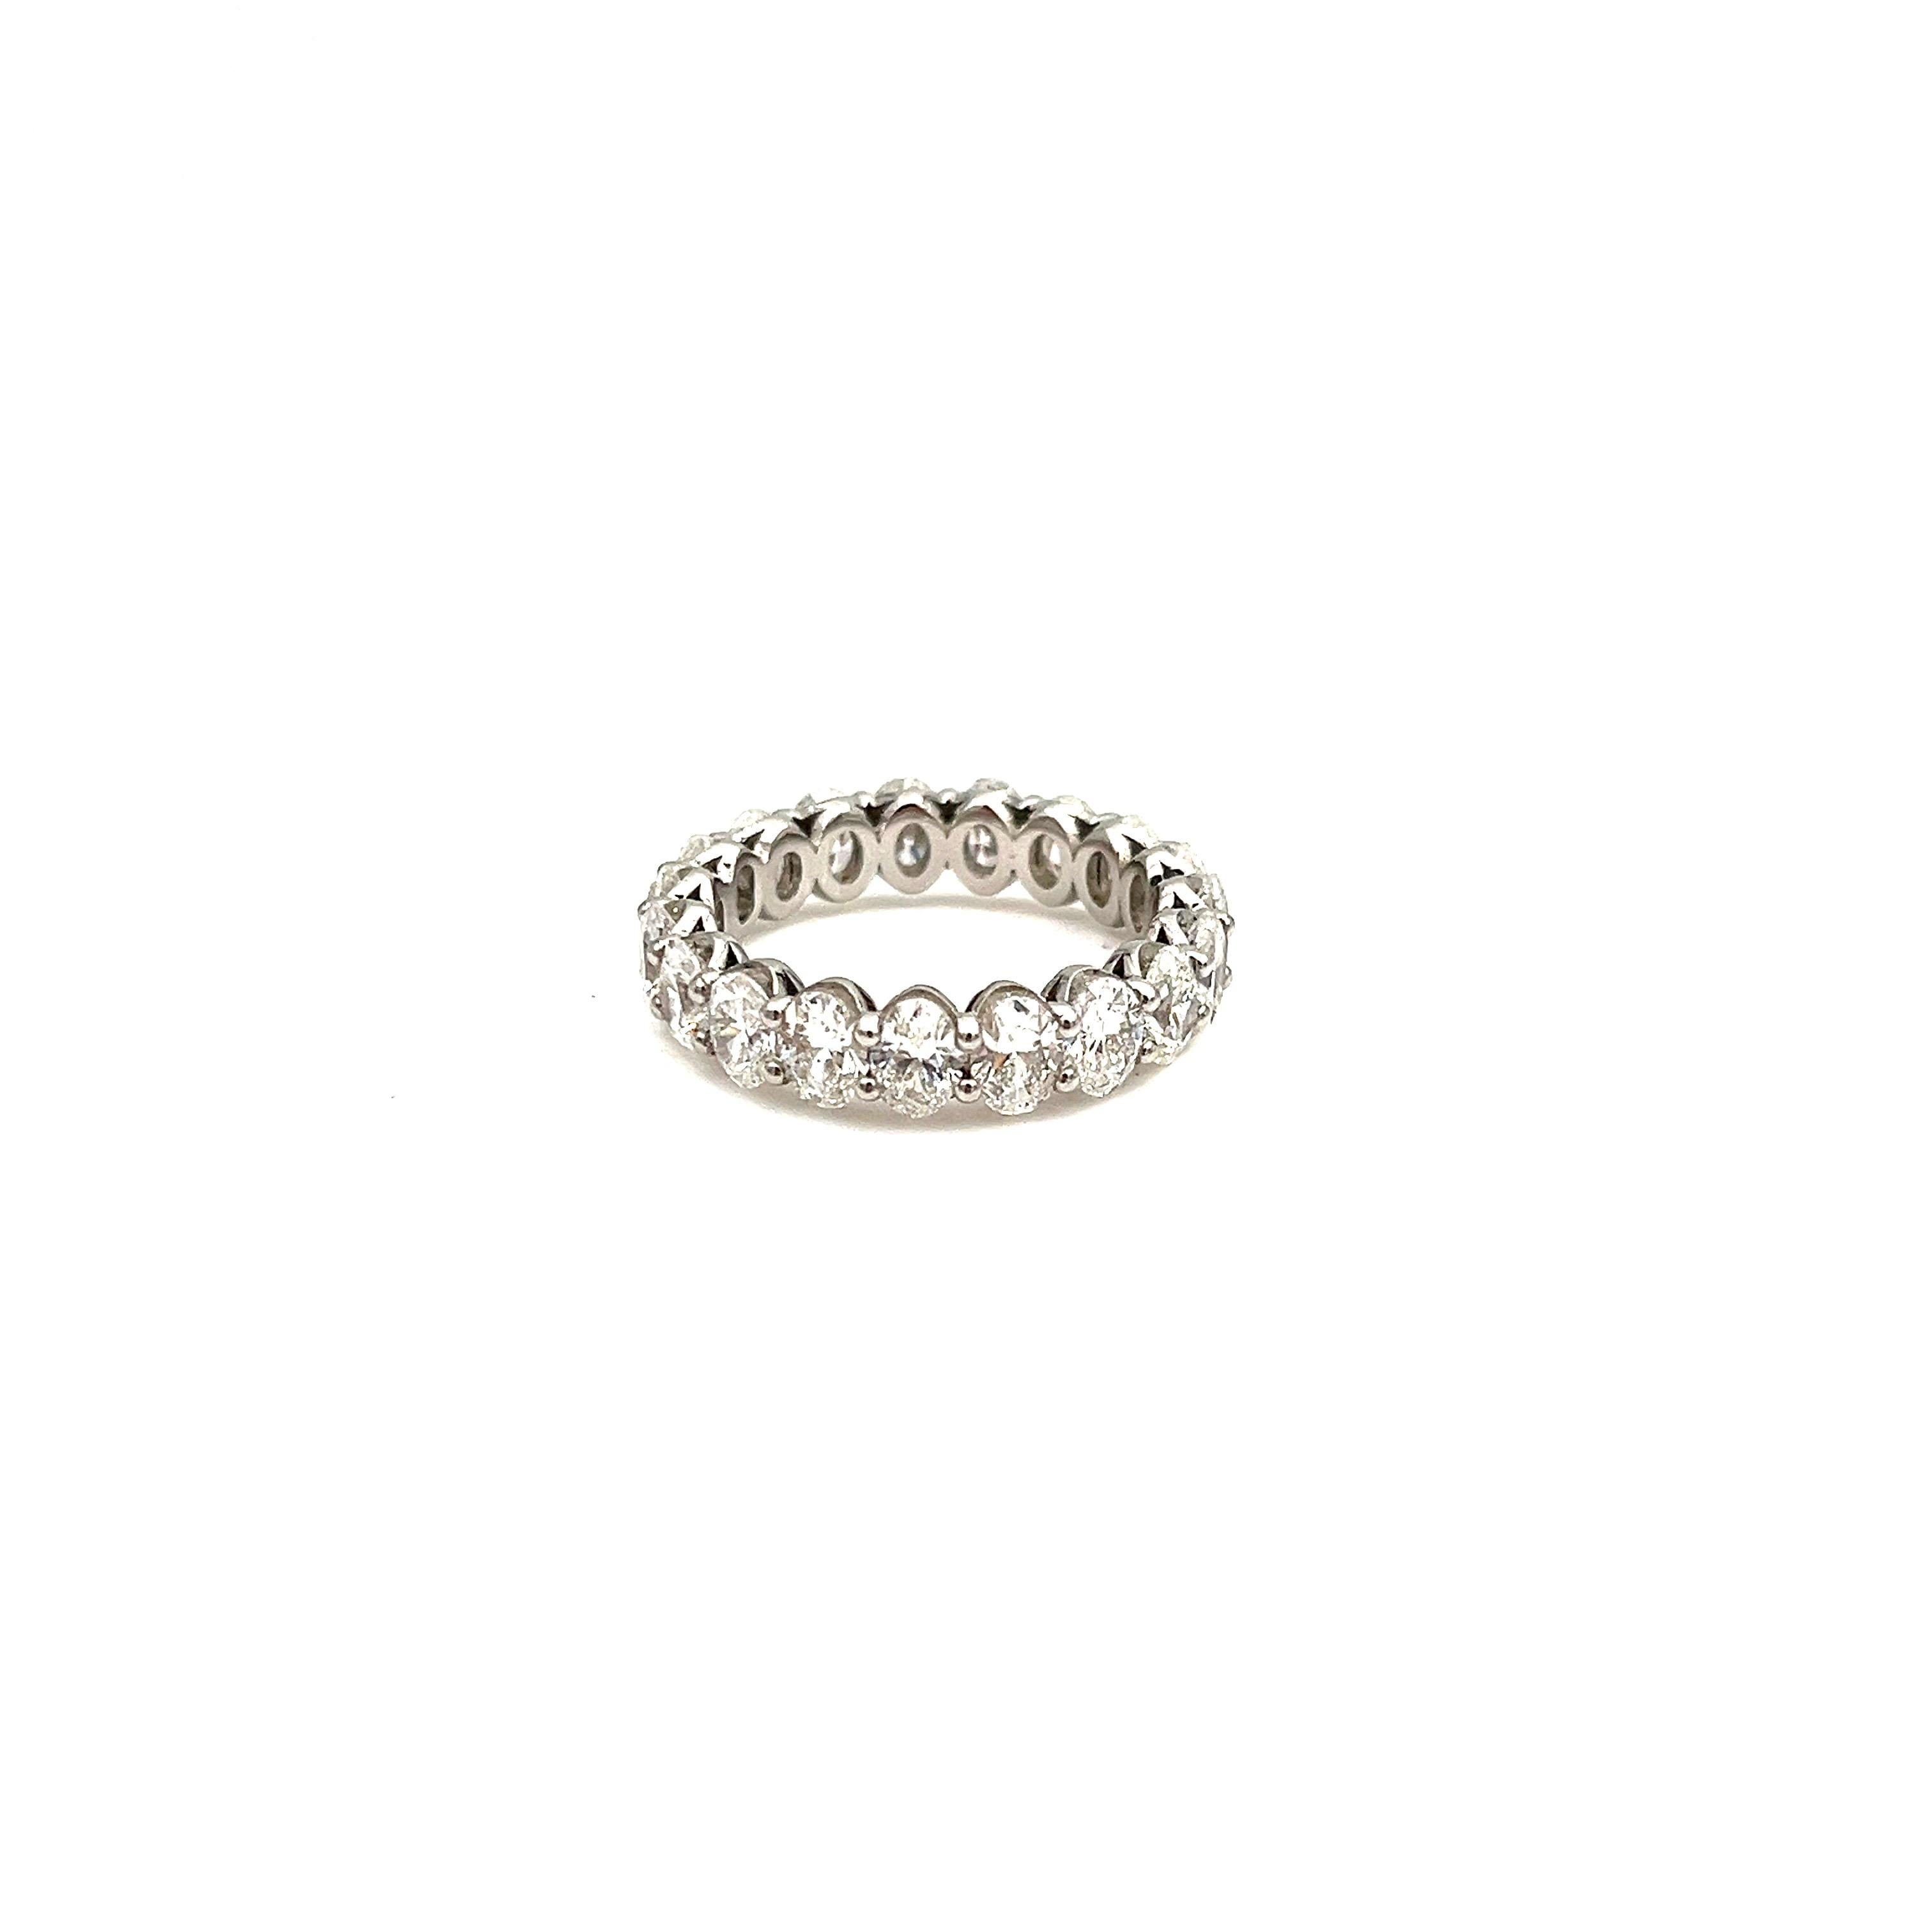 This gorgeous oval diamond eternity band set in the 